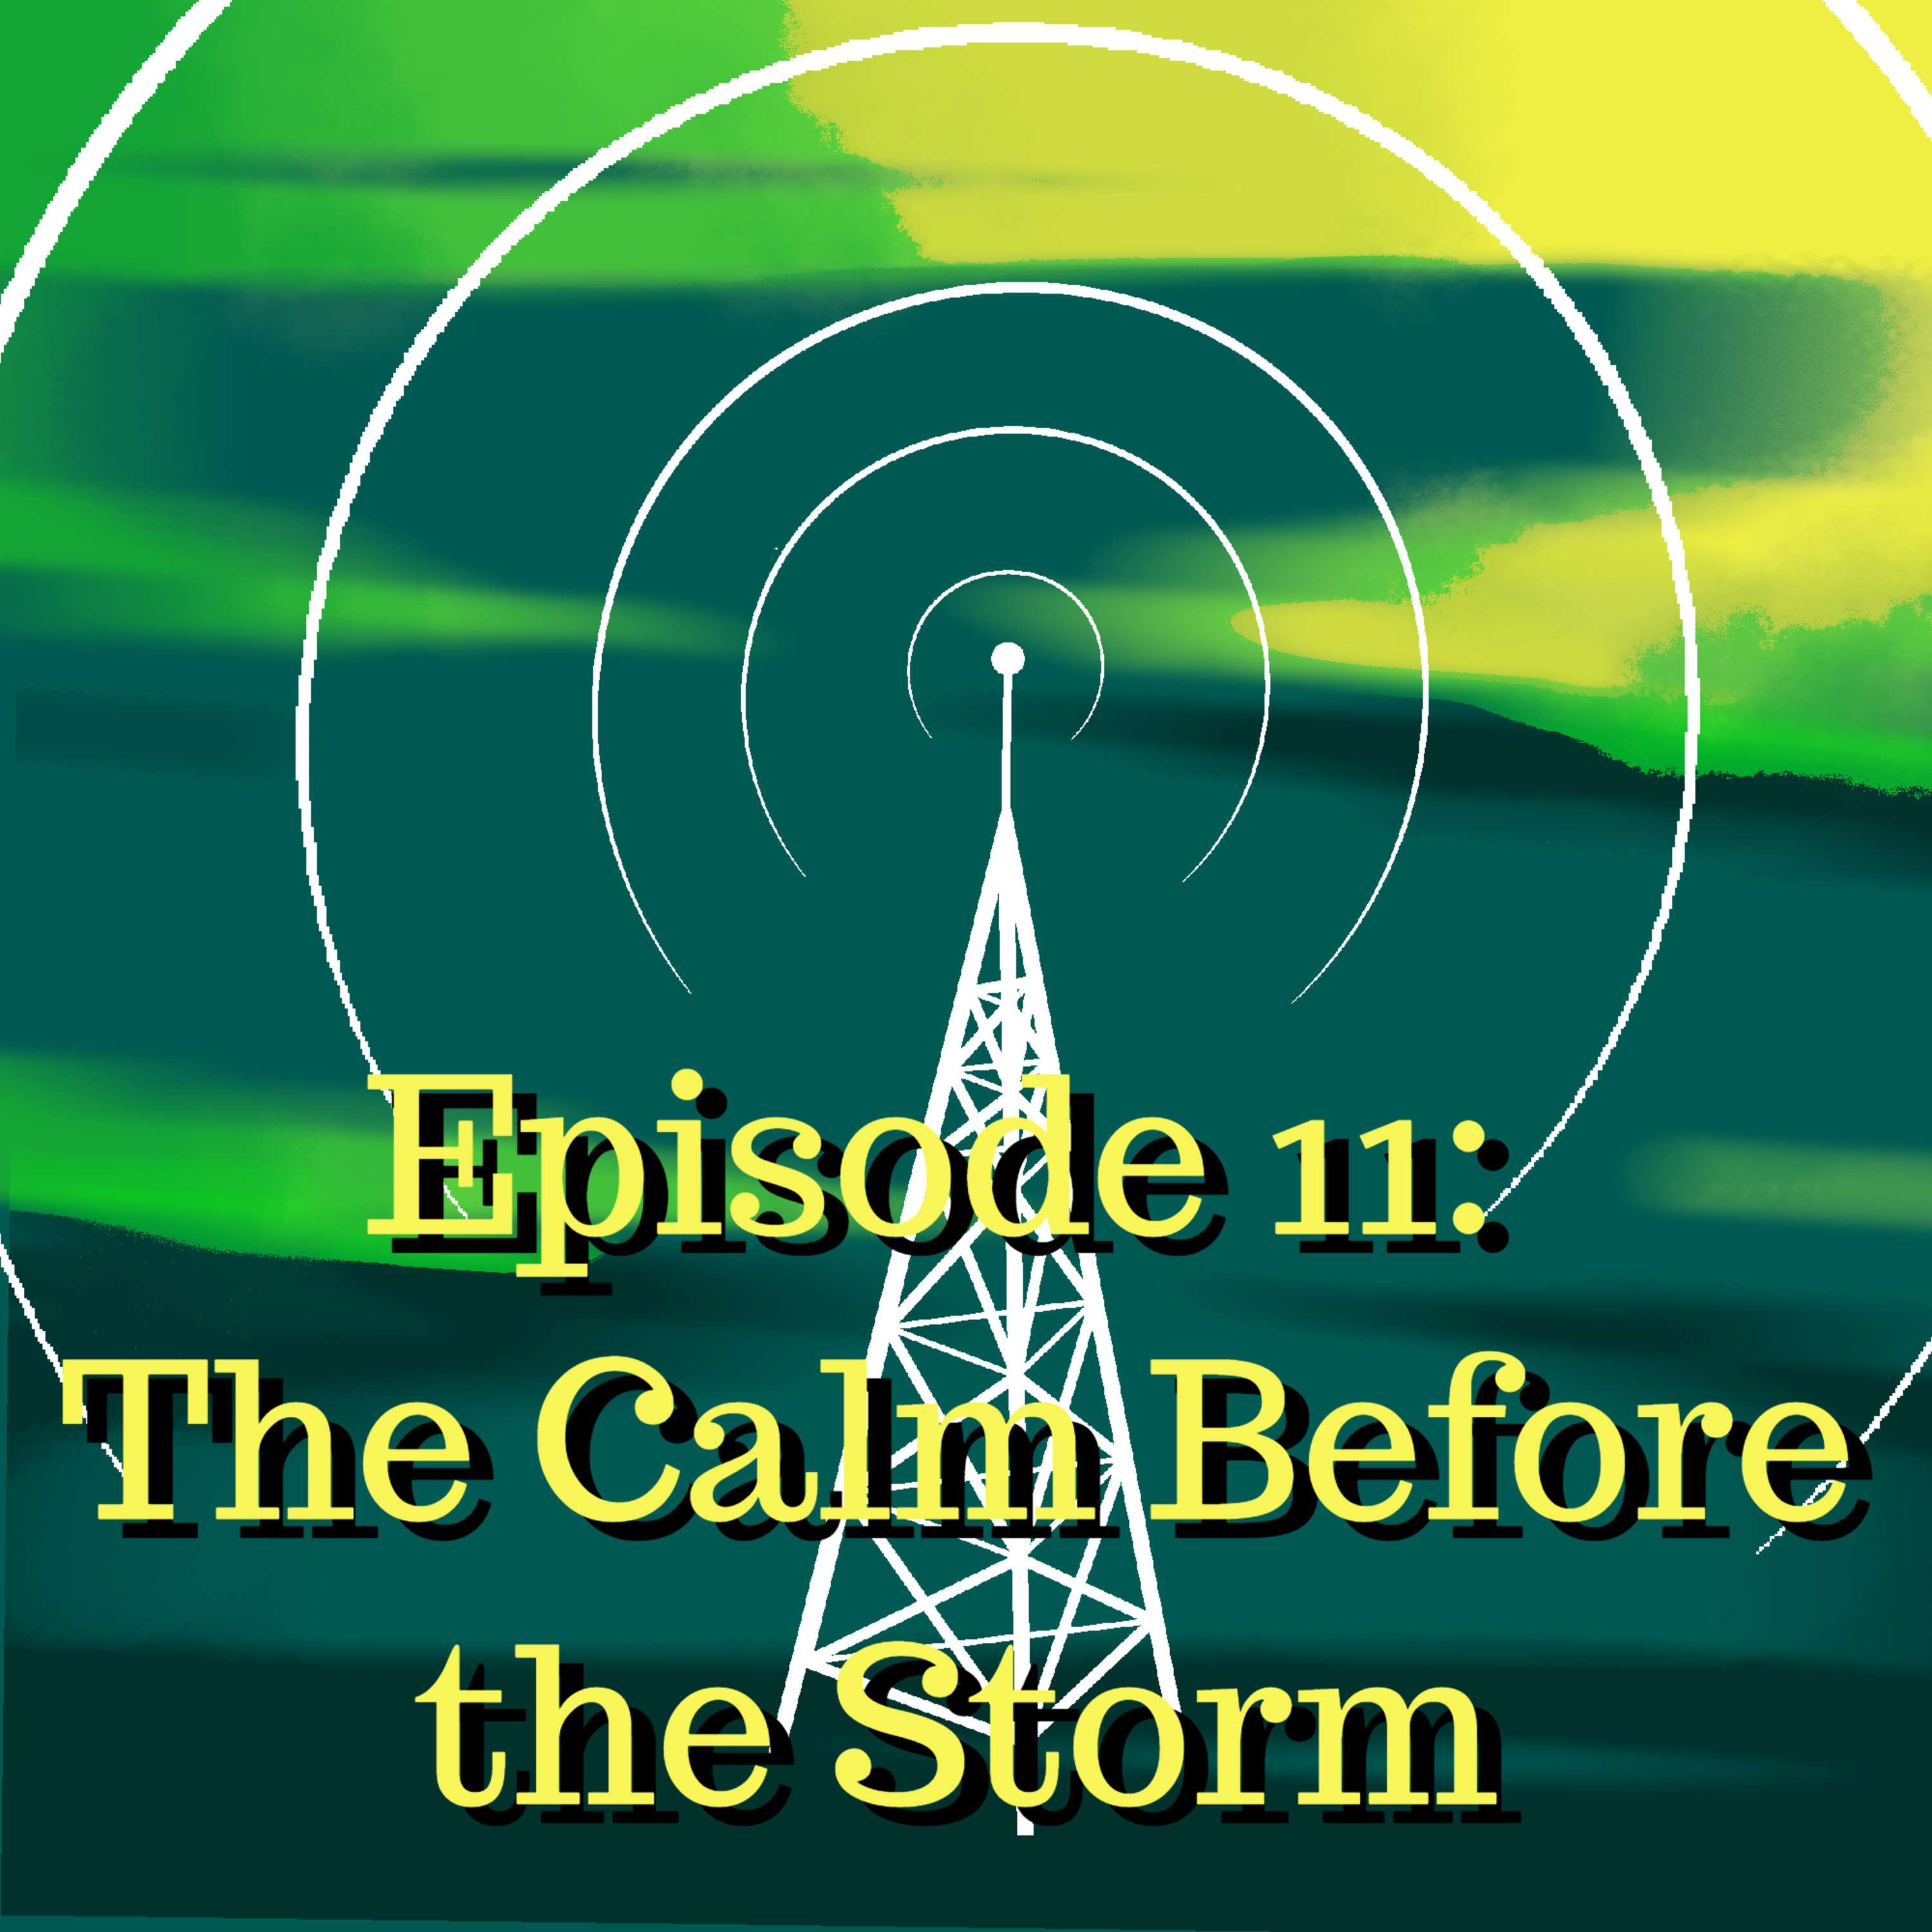 Episode 11: ”The Calm Before the Storm”